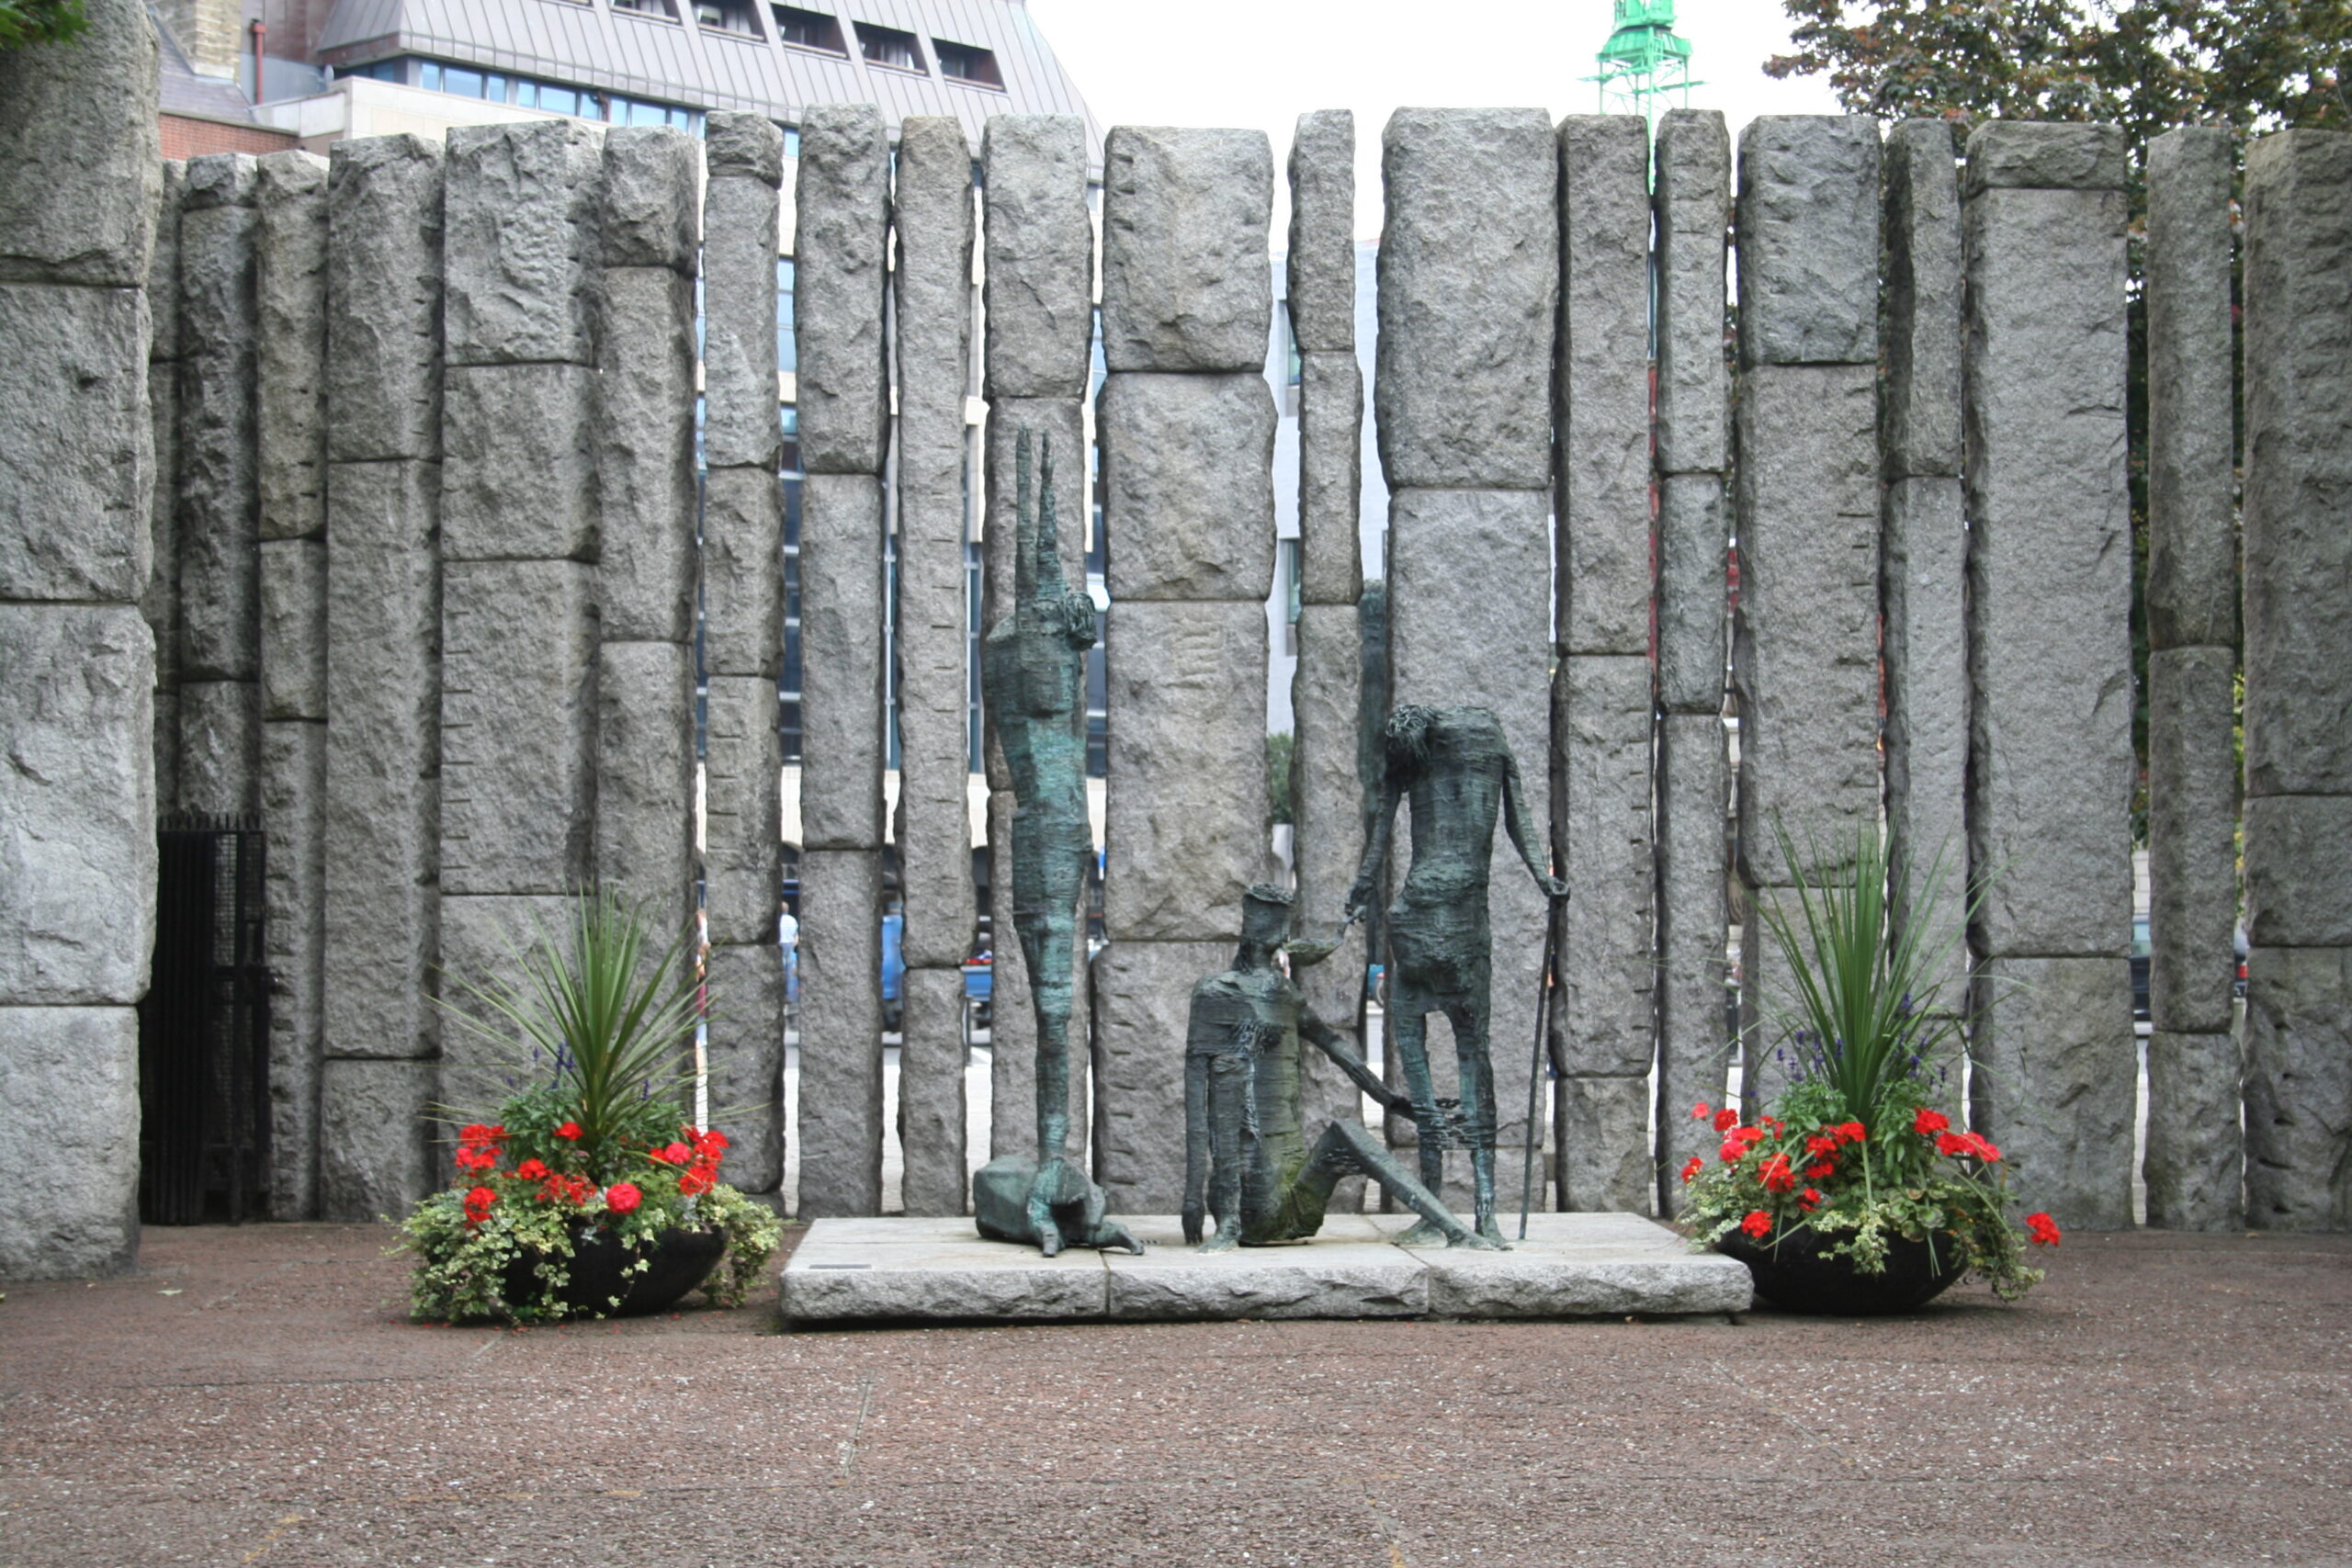 Bronze Sculpture of Wolfe Tone in front of Stone wall